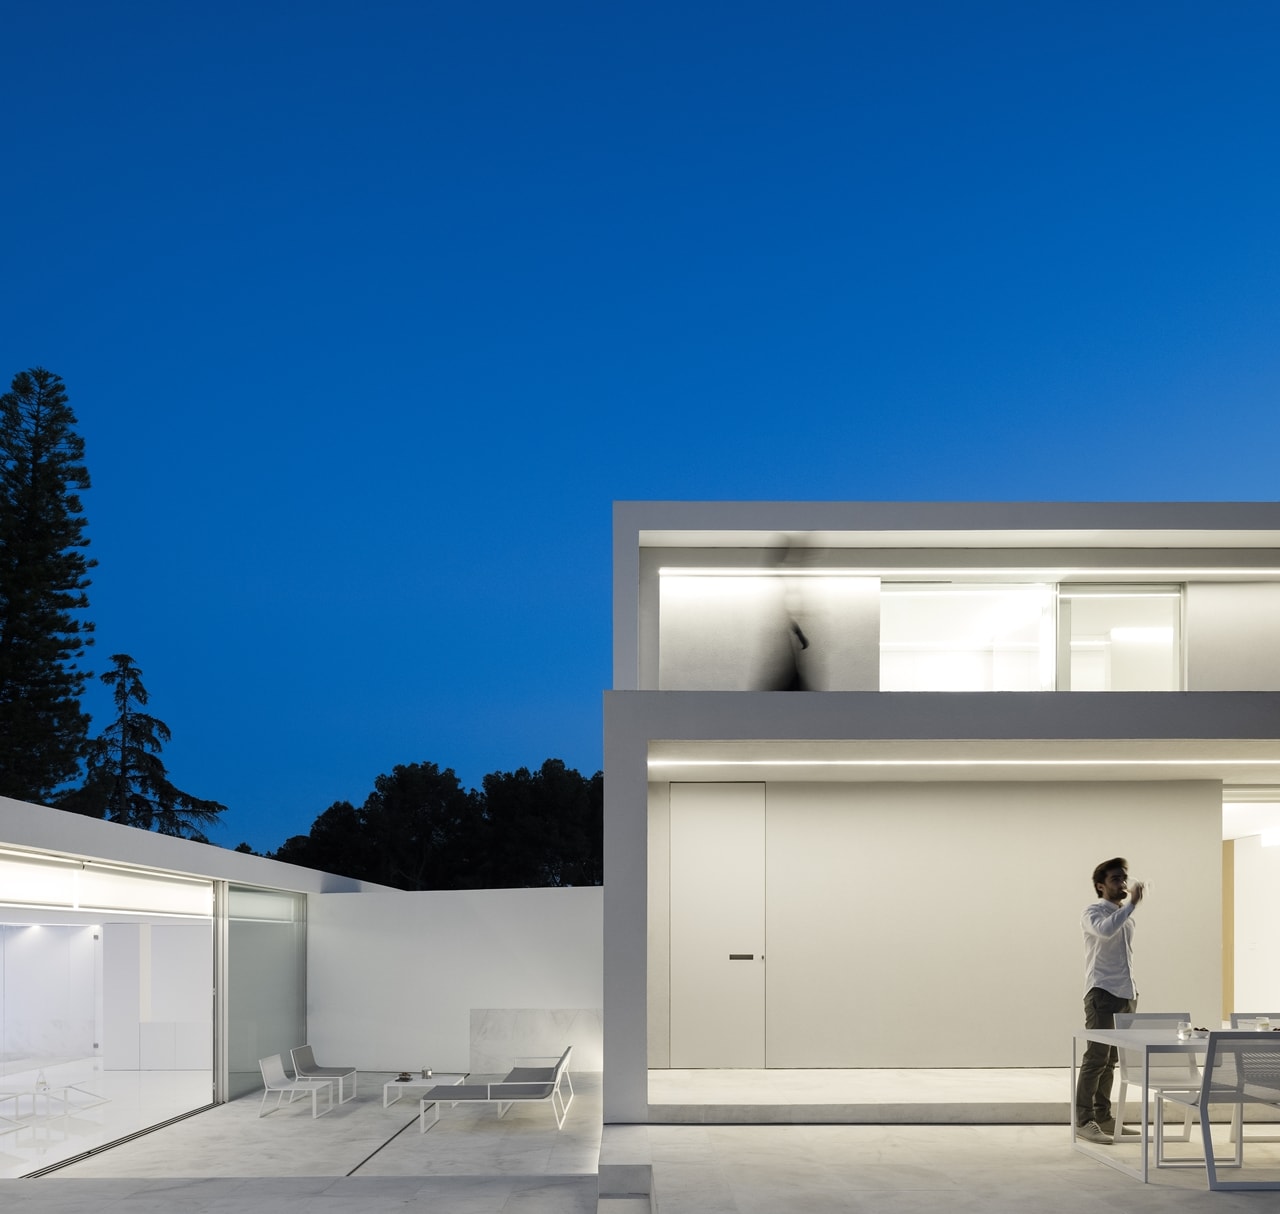 White facade of minimalist house designed by Fran Silvestre Architects lit up at night